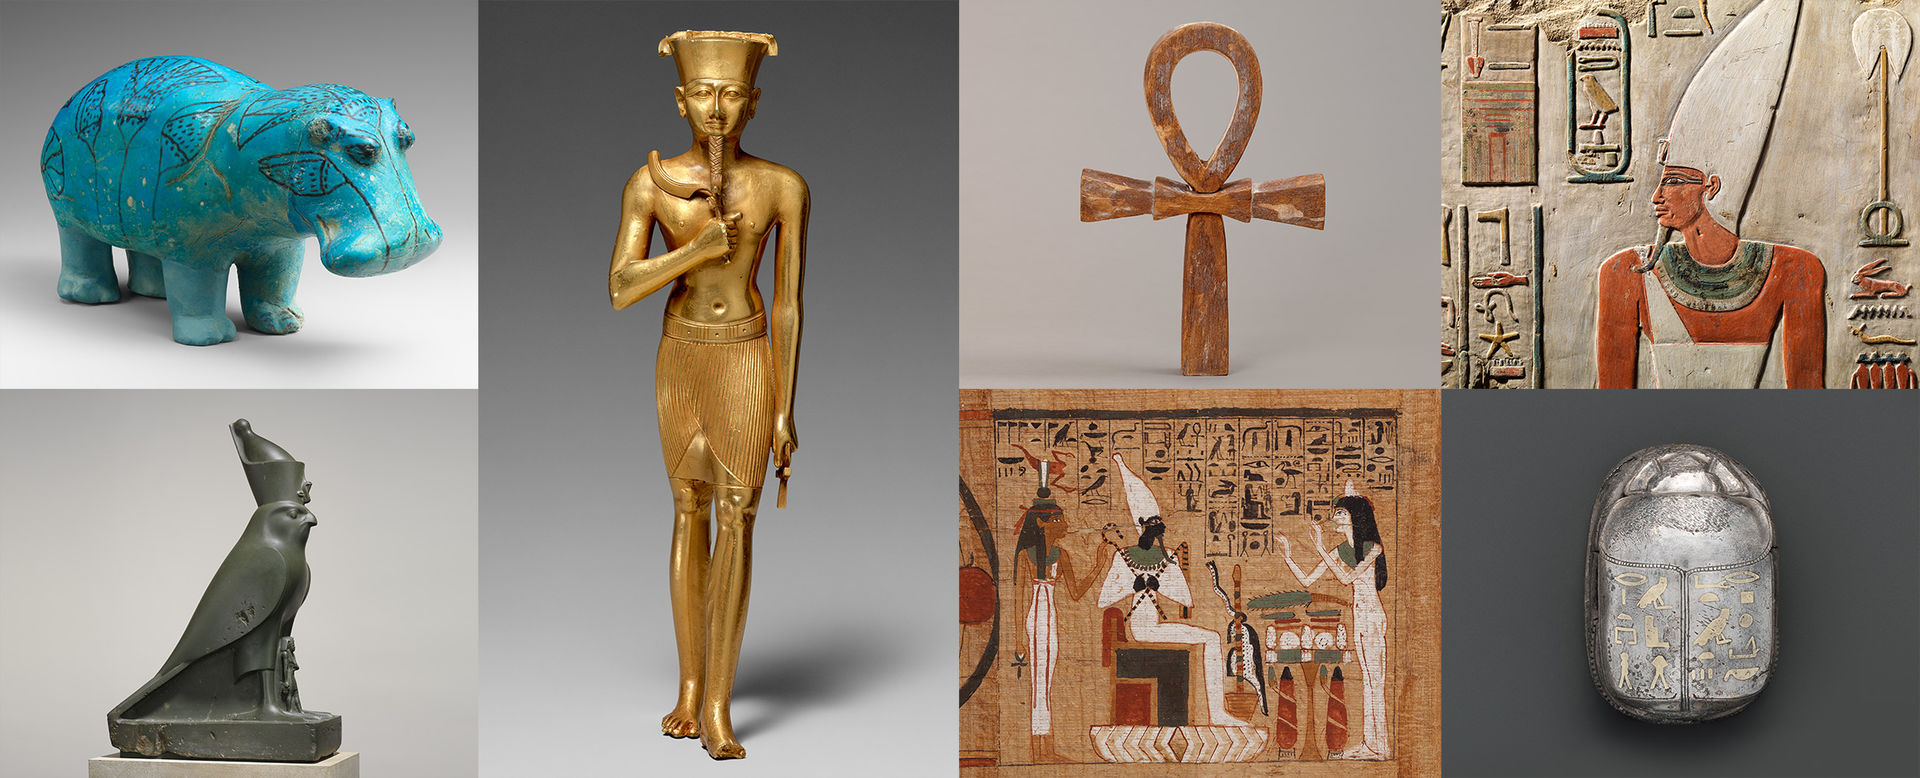 Seven artworks from the Egyptian collection